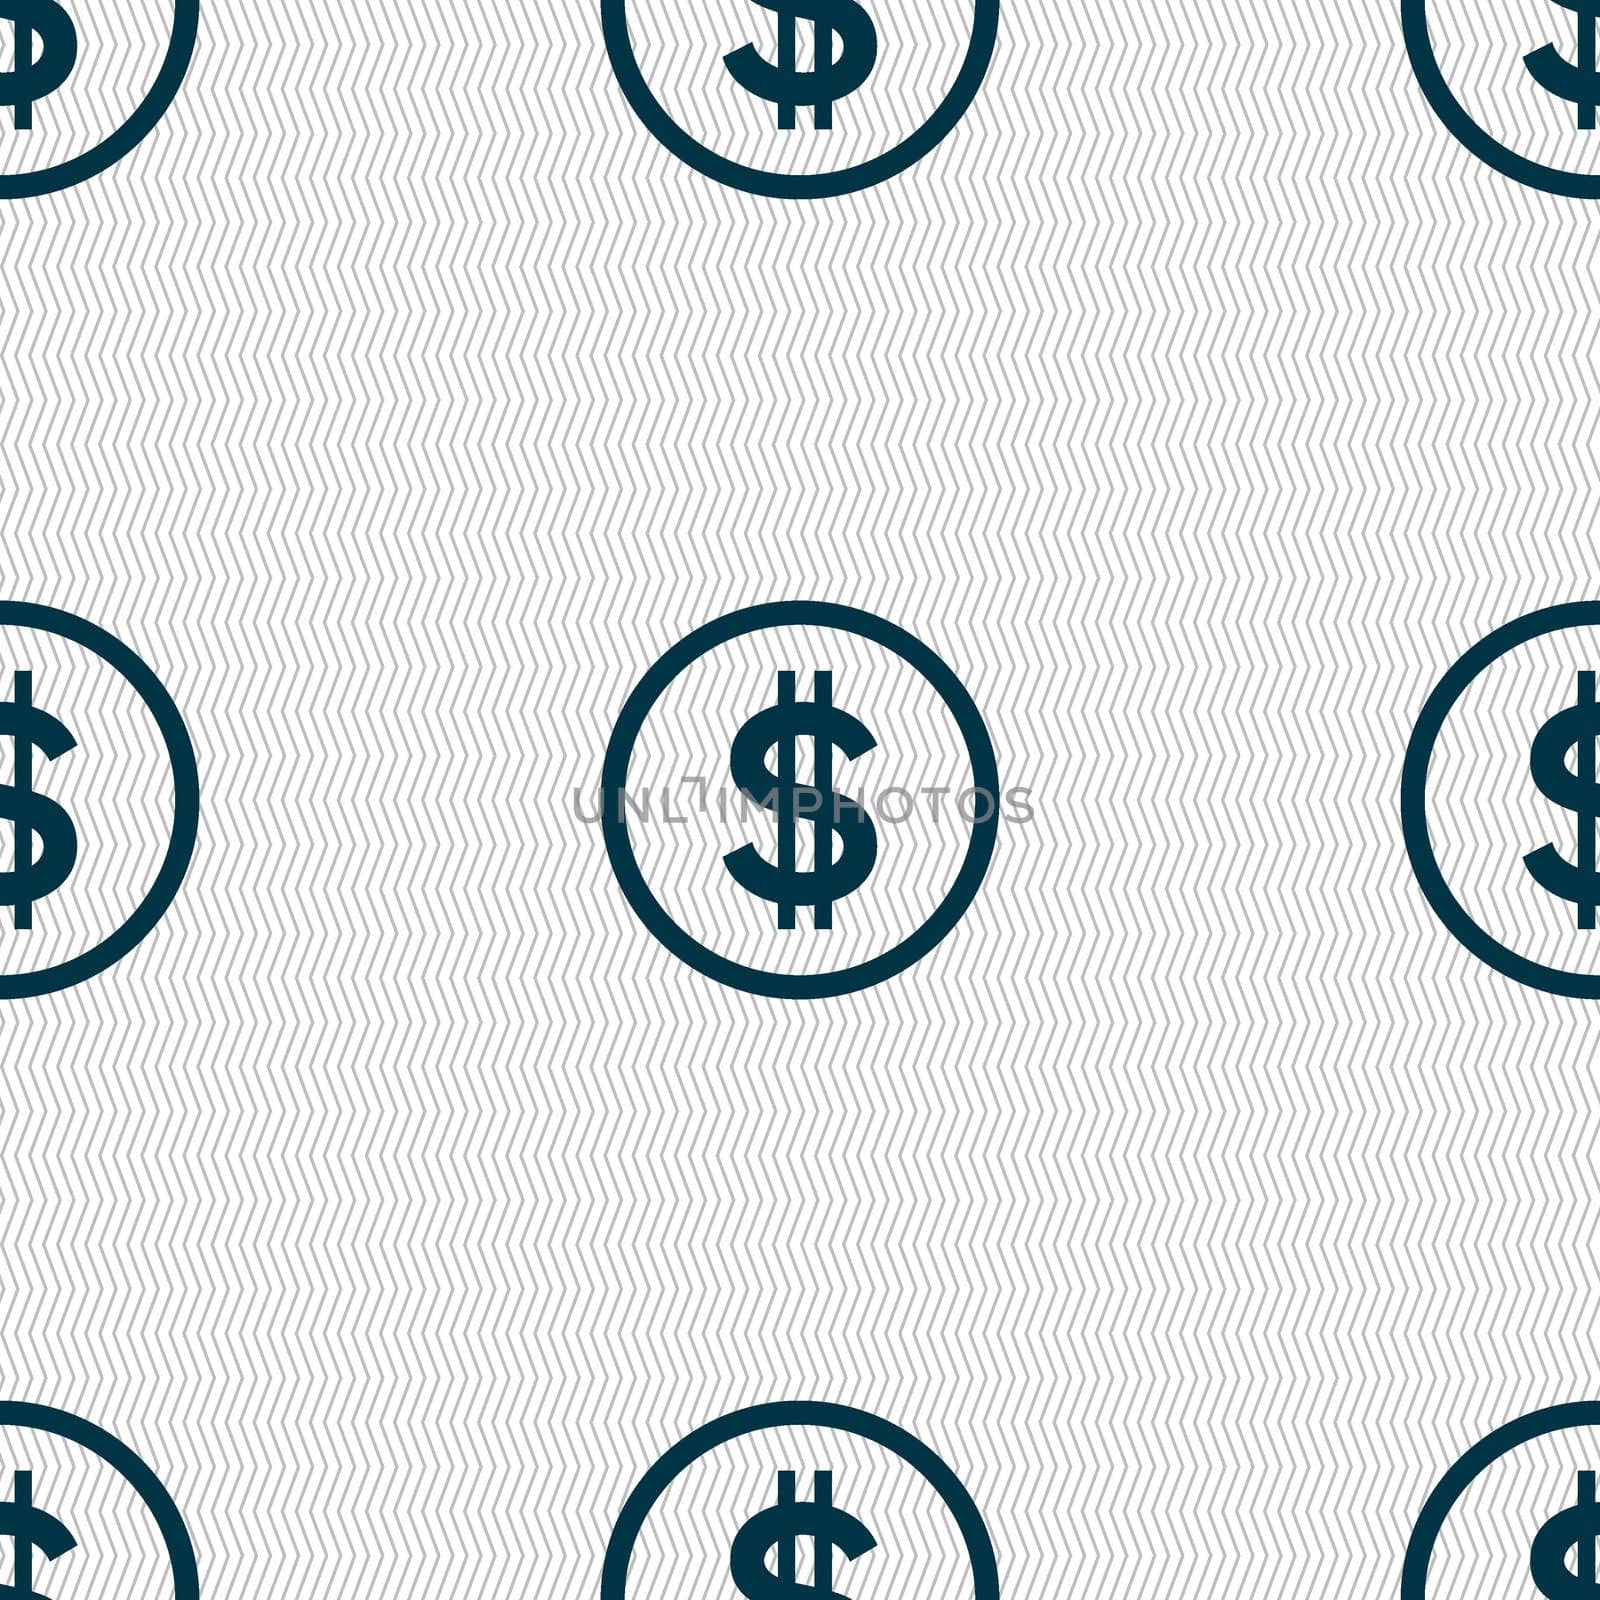 Dollar icon sign. Seamless abstract background with geometric shapes. illustration